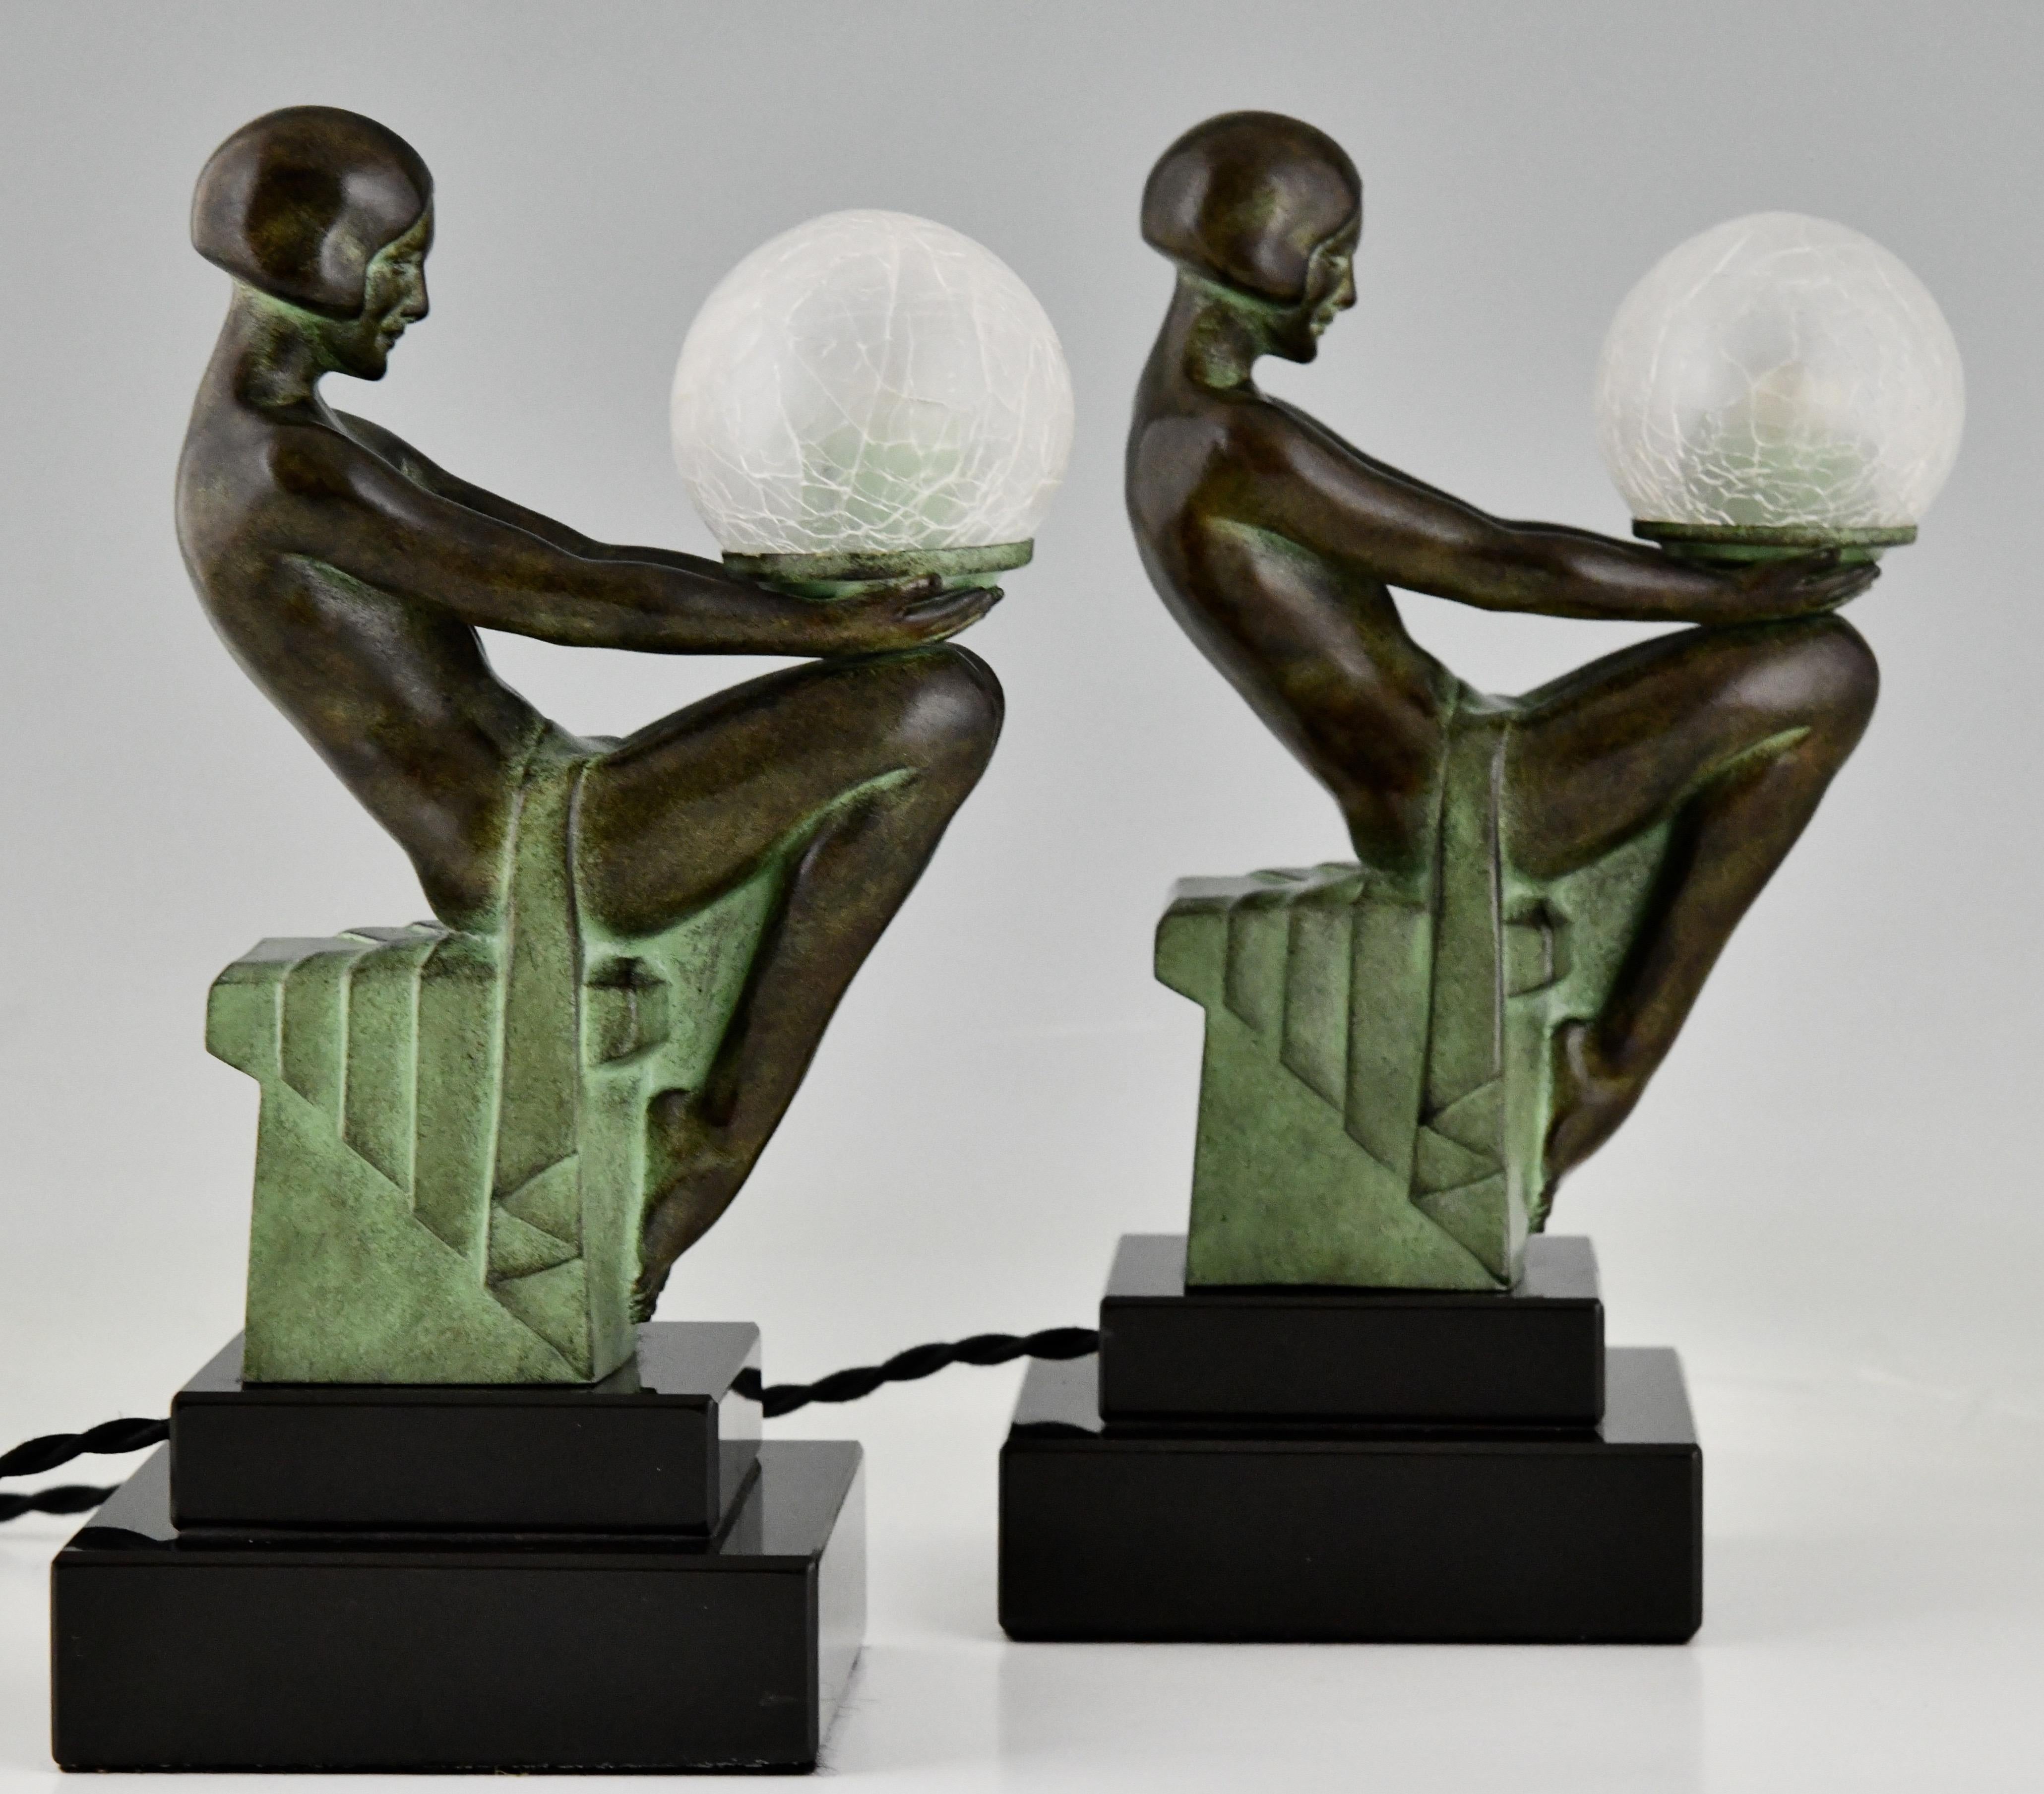 Contemporary Pair of Art Deco Style Table Lamp with Seated Nudes by Max Le Verrier 